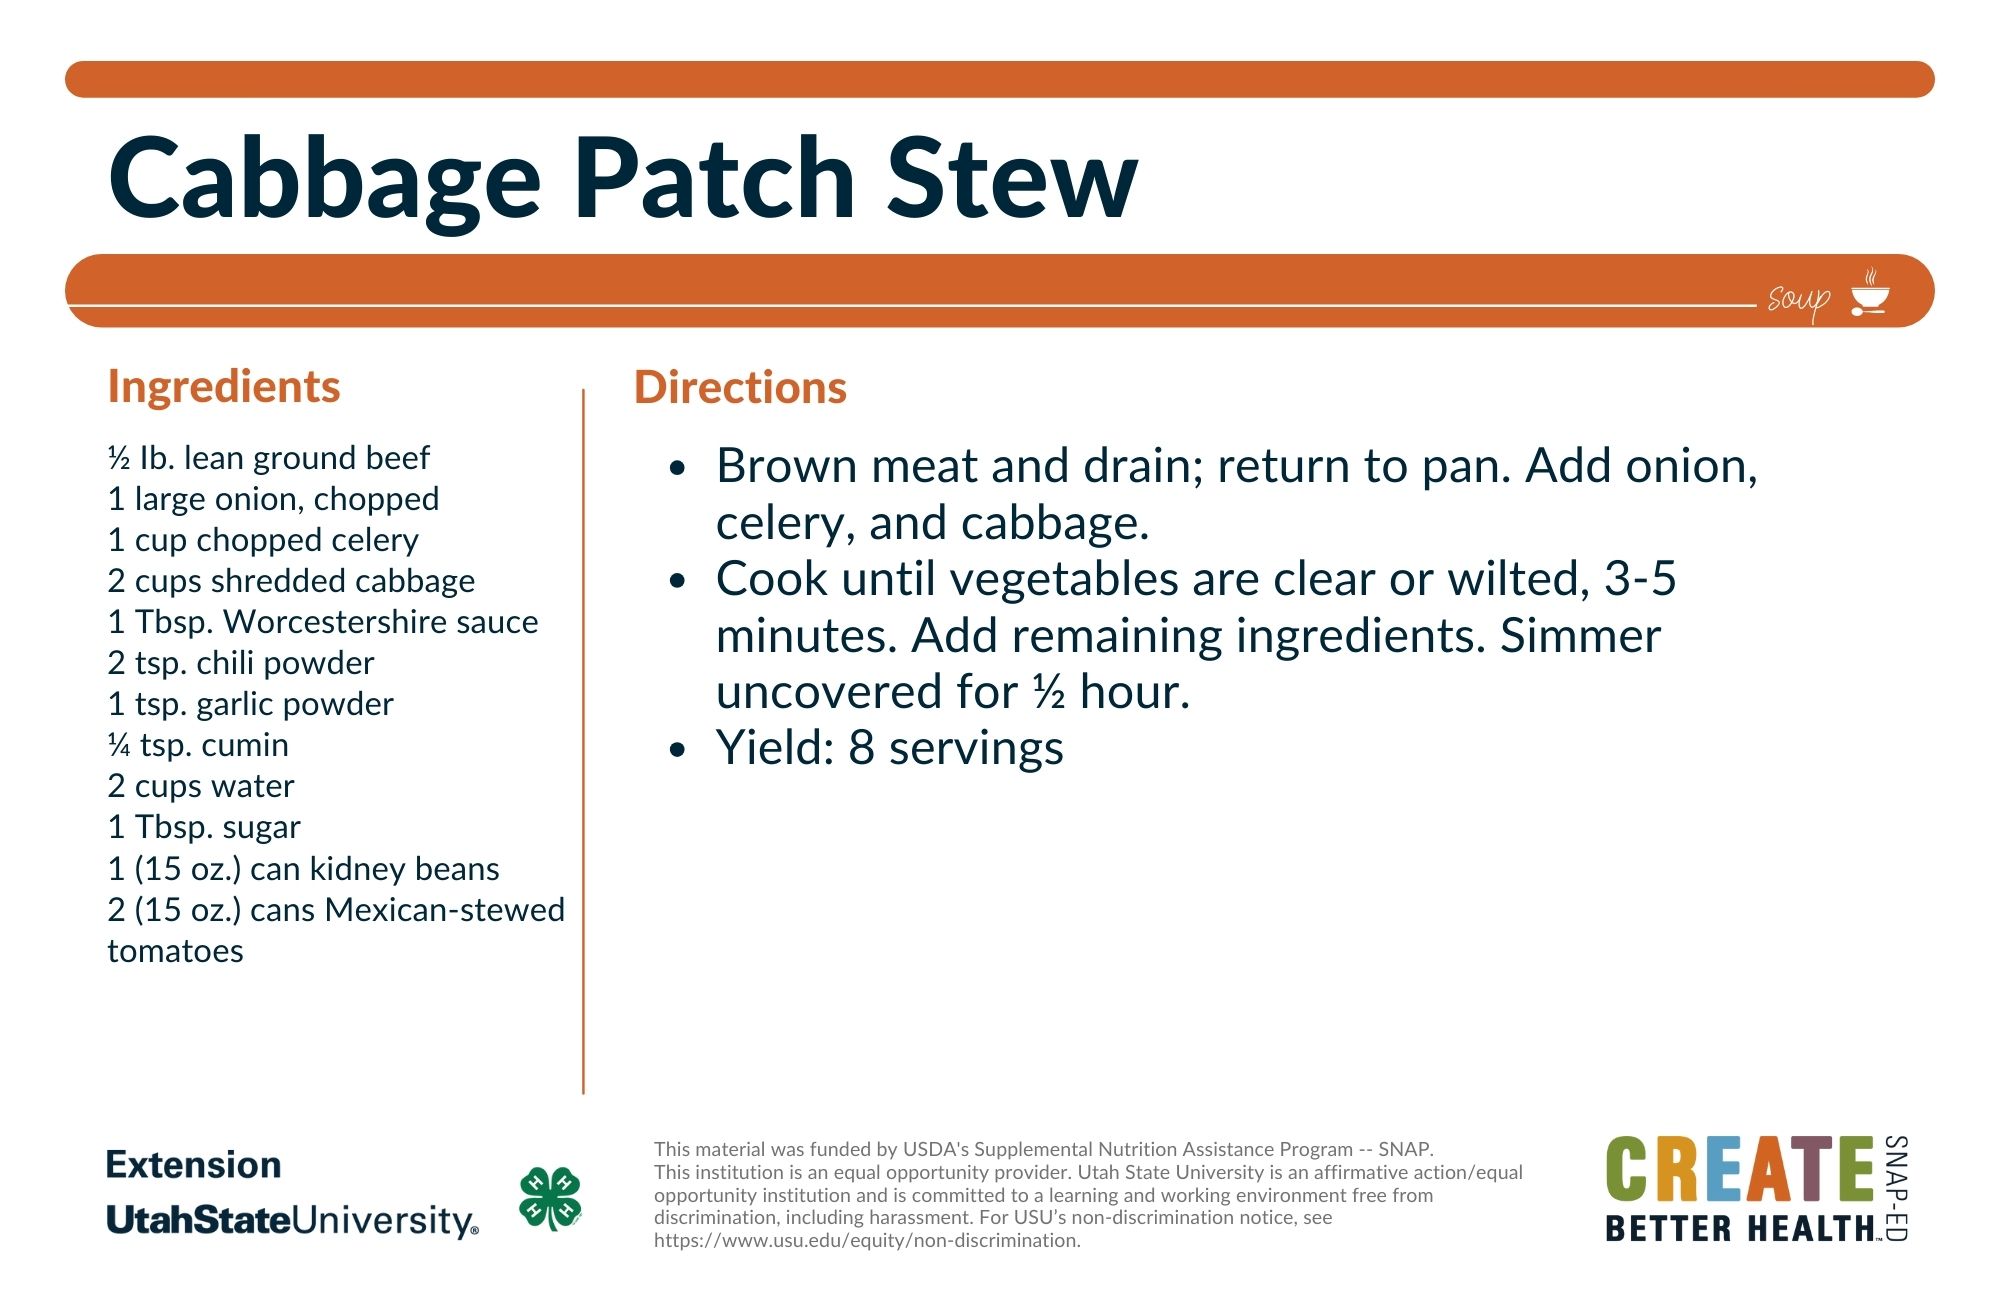 Cabbage beef stew recipe card